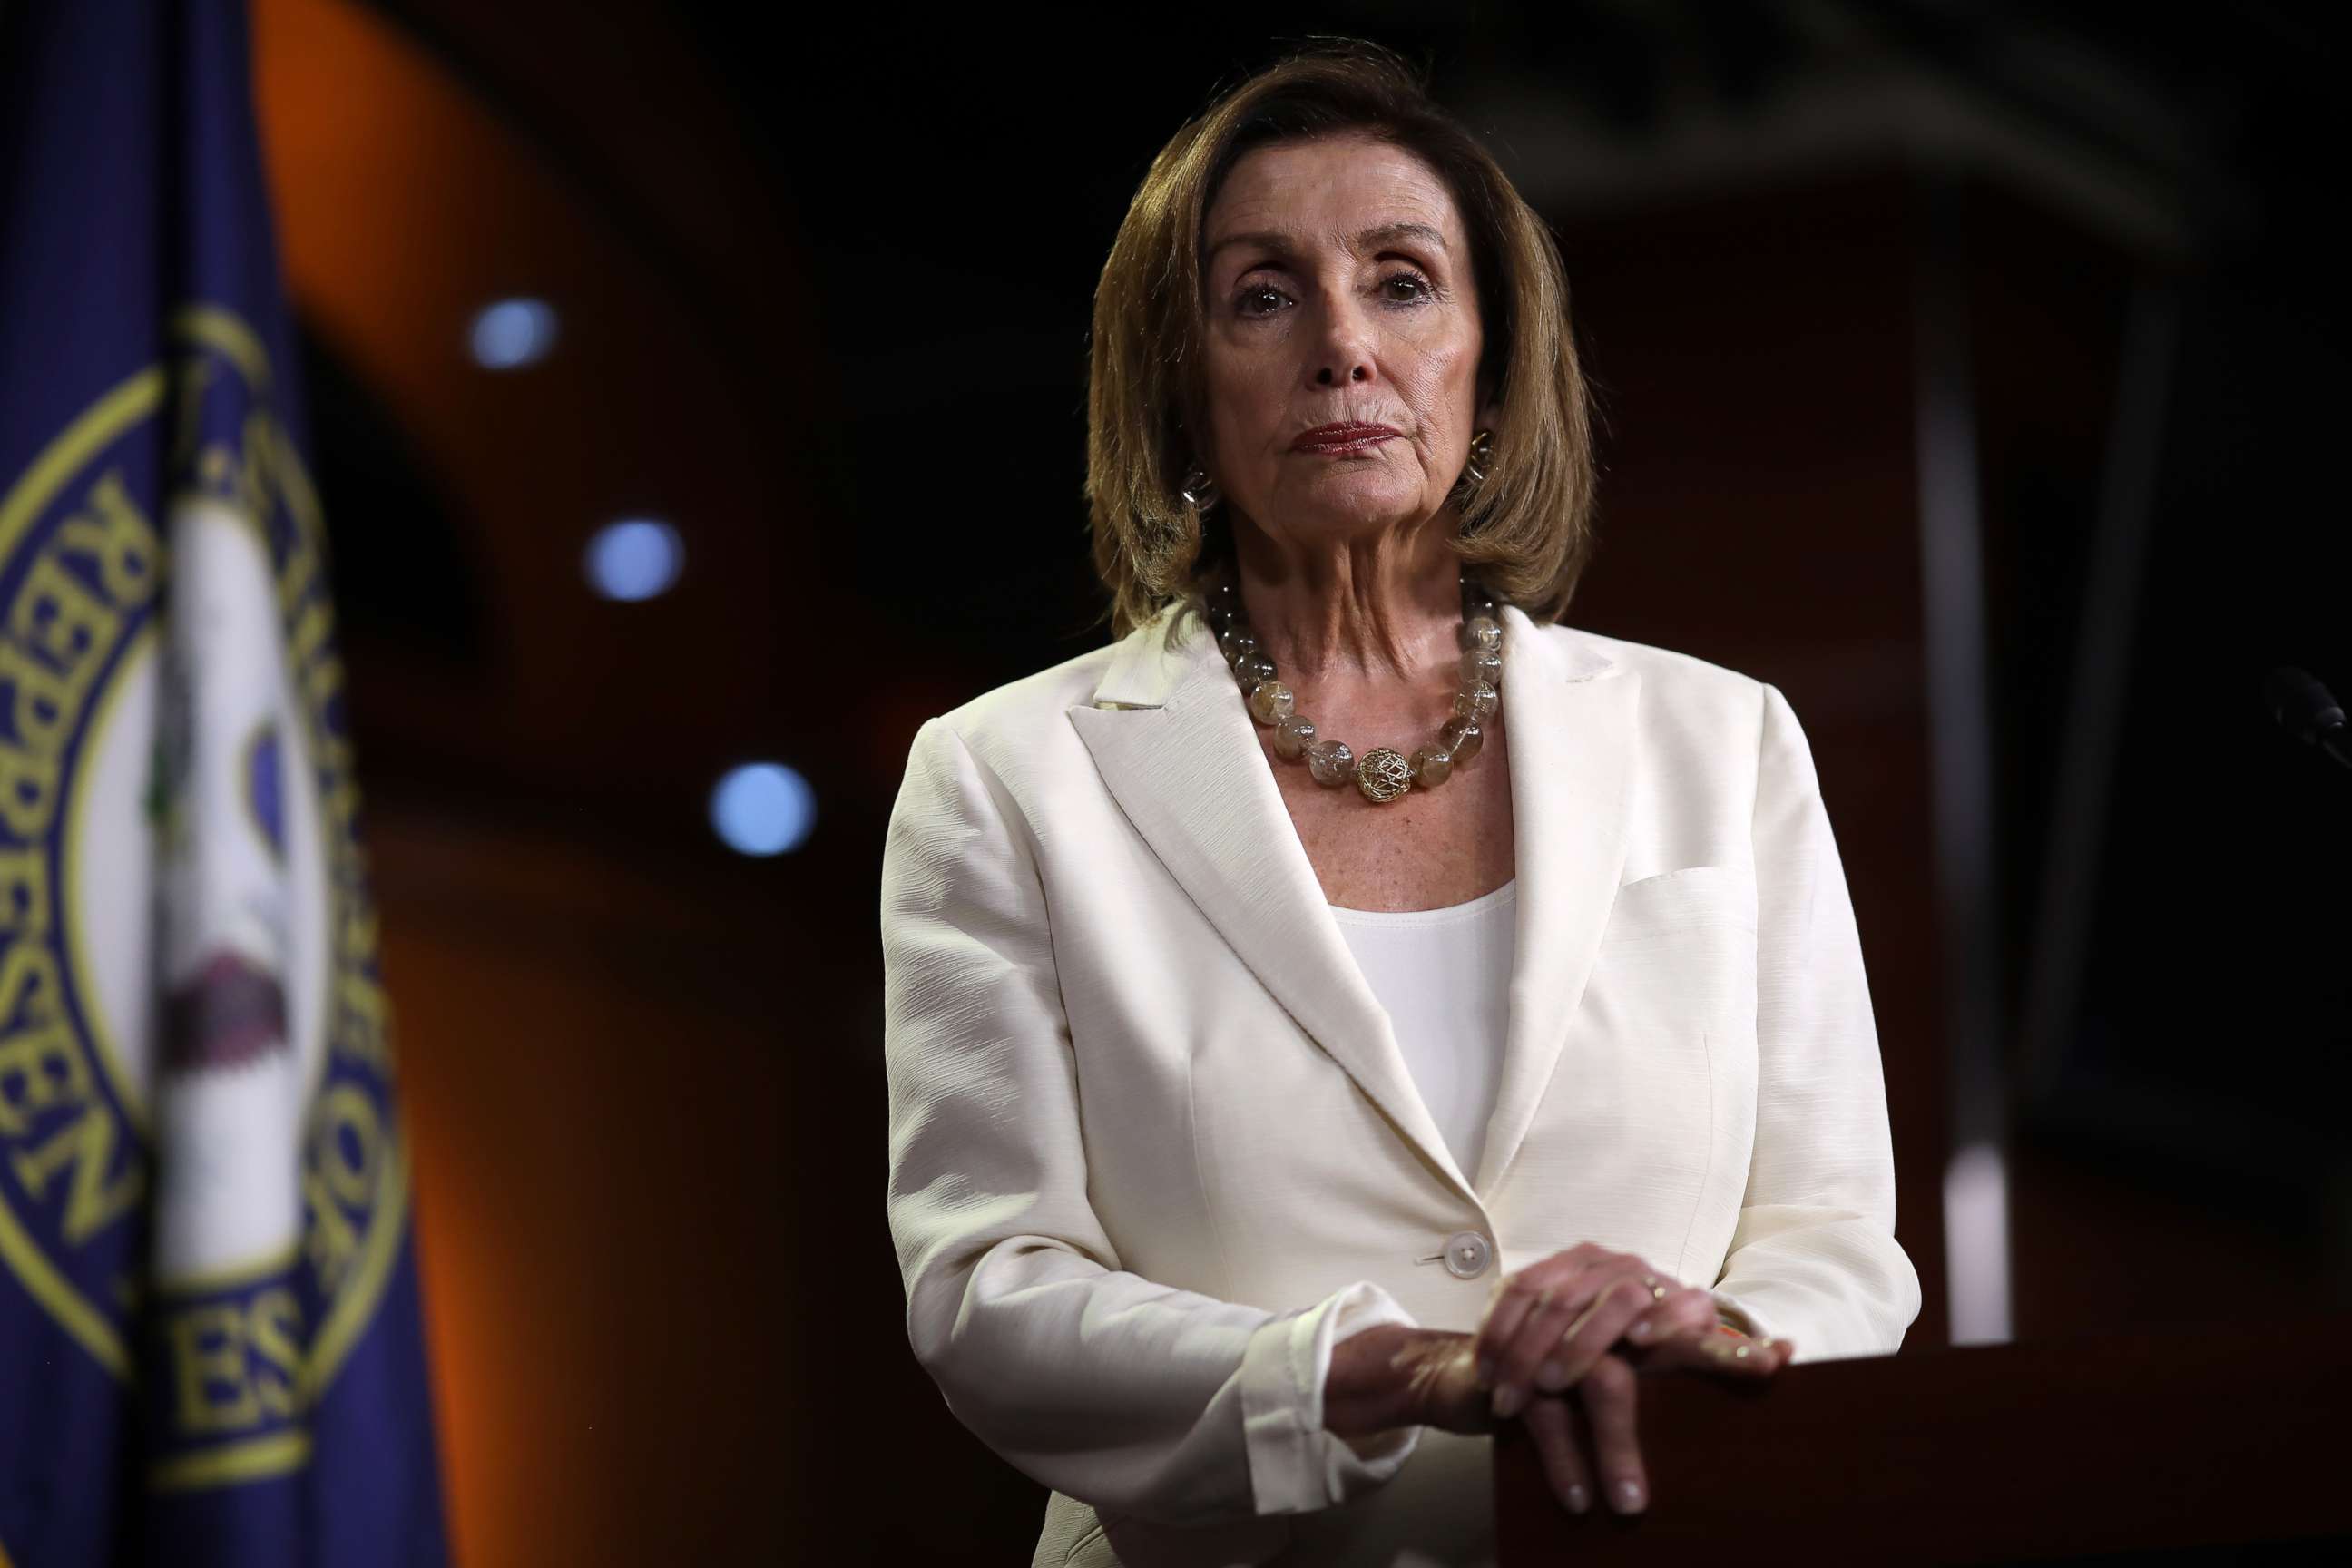 PHOTO: Speaker of the House Nancy Pelosi (D-CA) answers questions during a press conference at the Capitol, July 11, 2019.